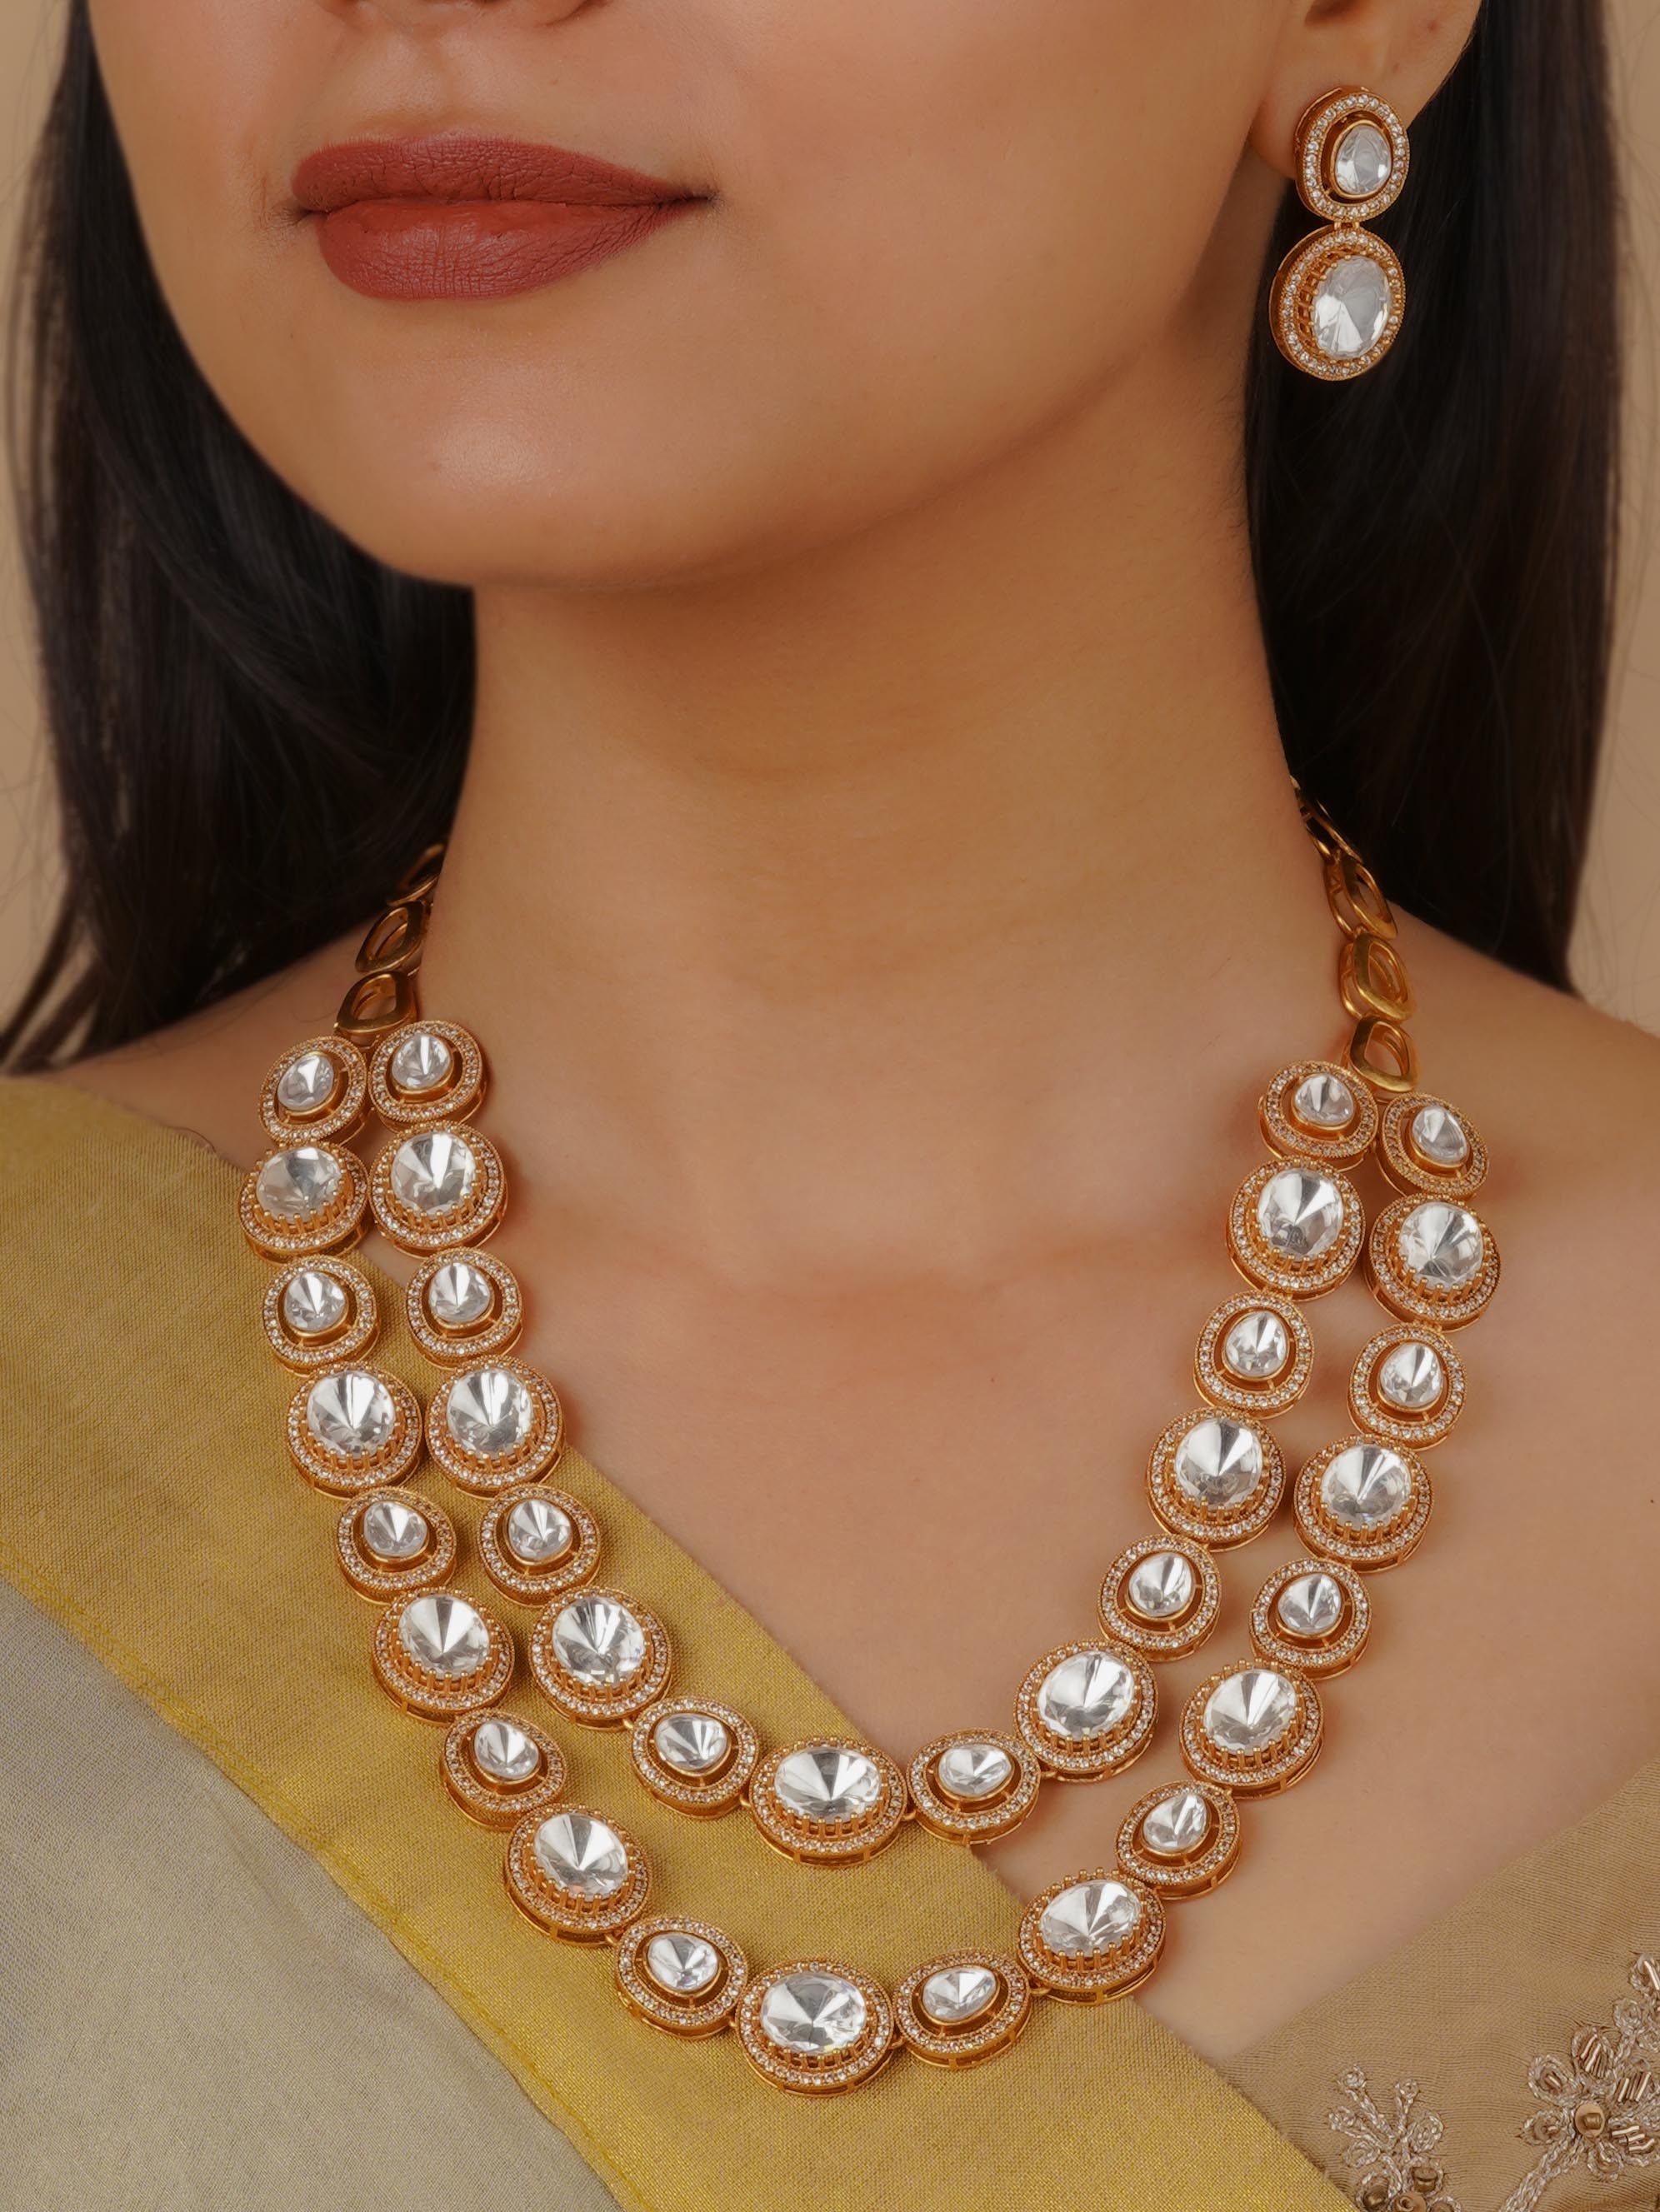 PK-S134 - White Color Gold Plated Faux Polki Necklace Set